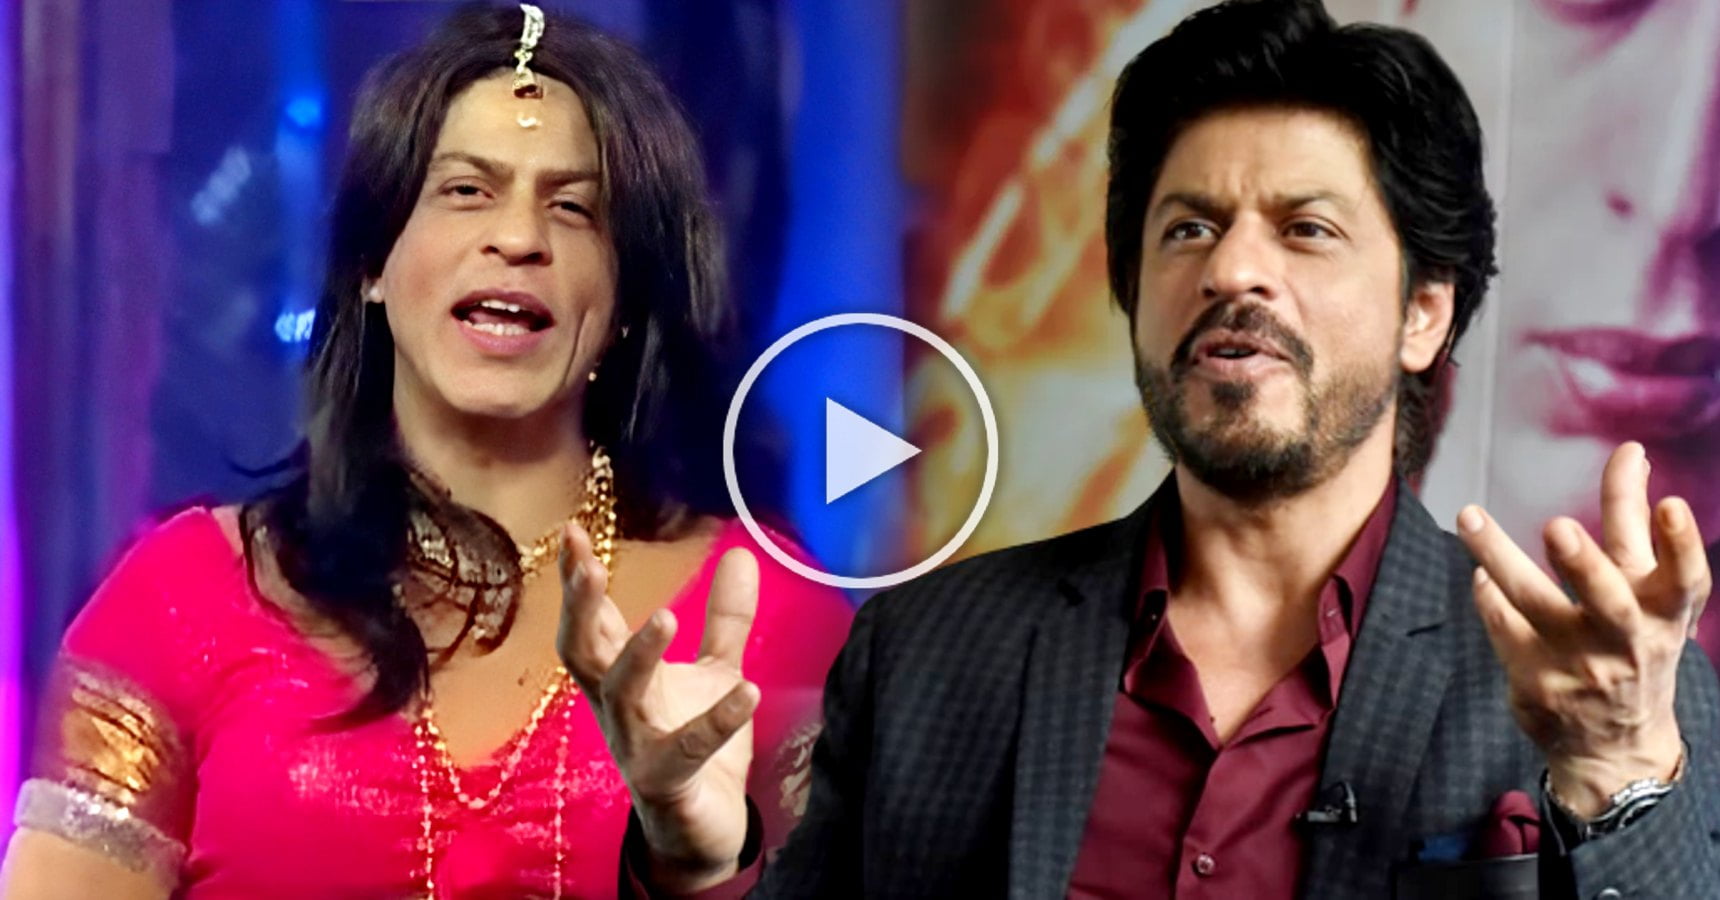 When Shah Rukh Khan was called ‘Chakka’ during a live interview this is how he reacted